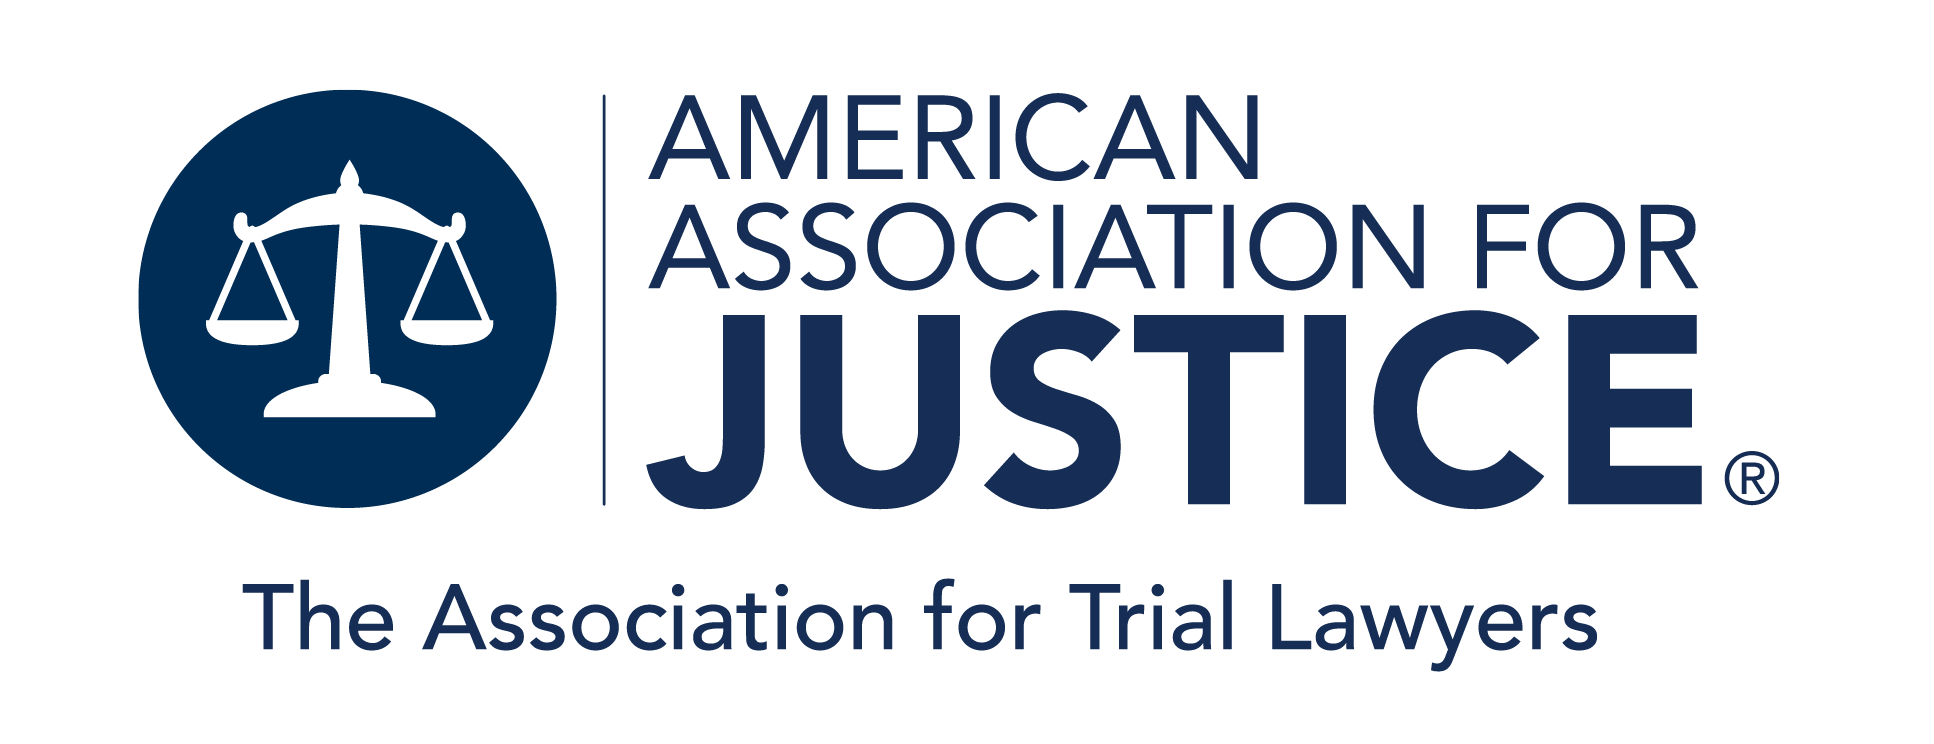 American Association for Justice in Washington, D.C